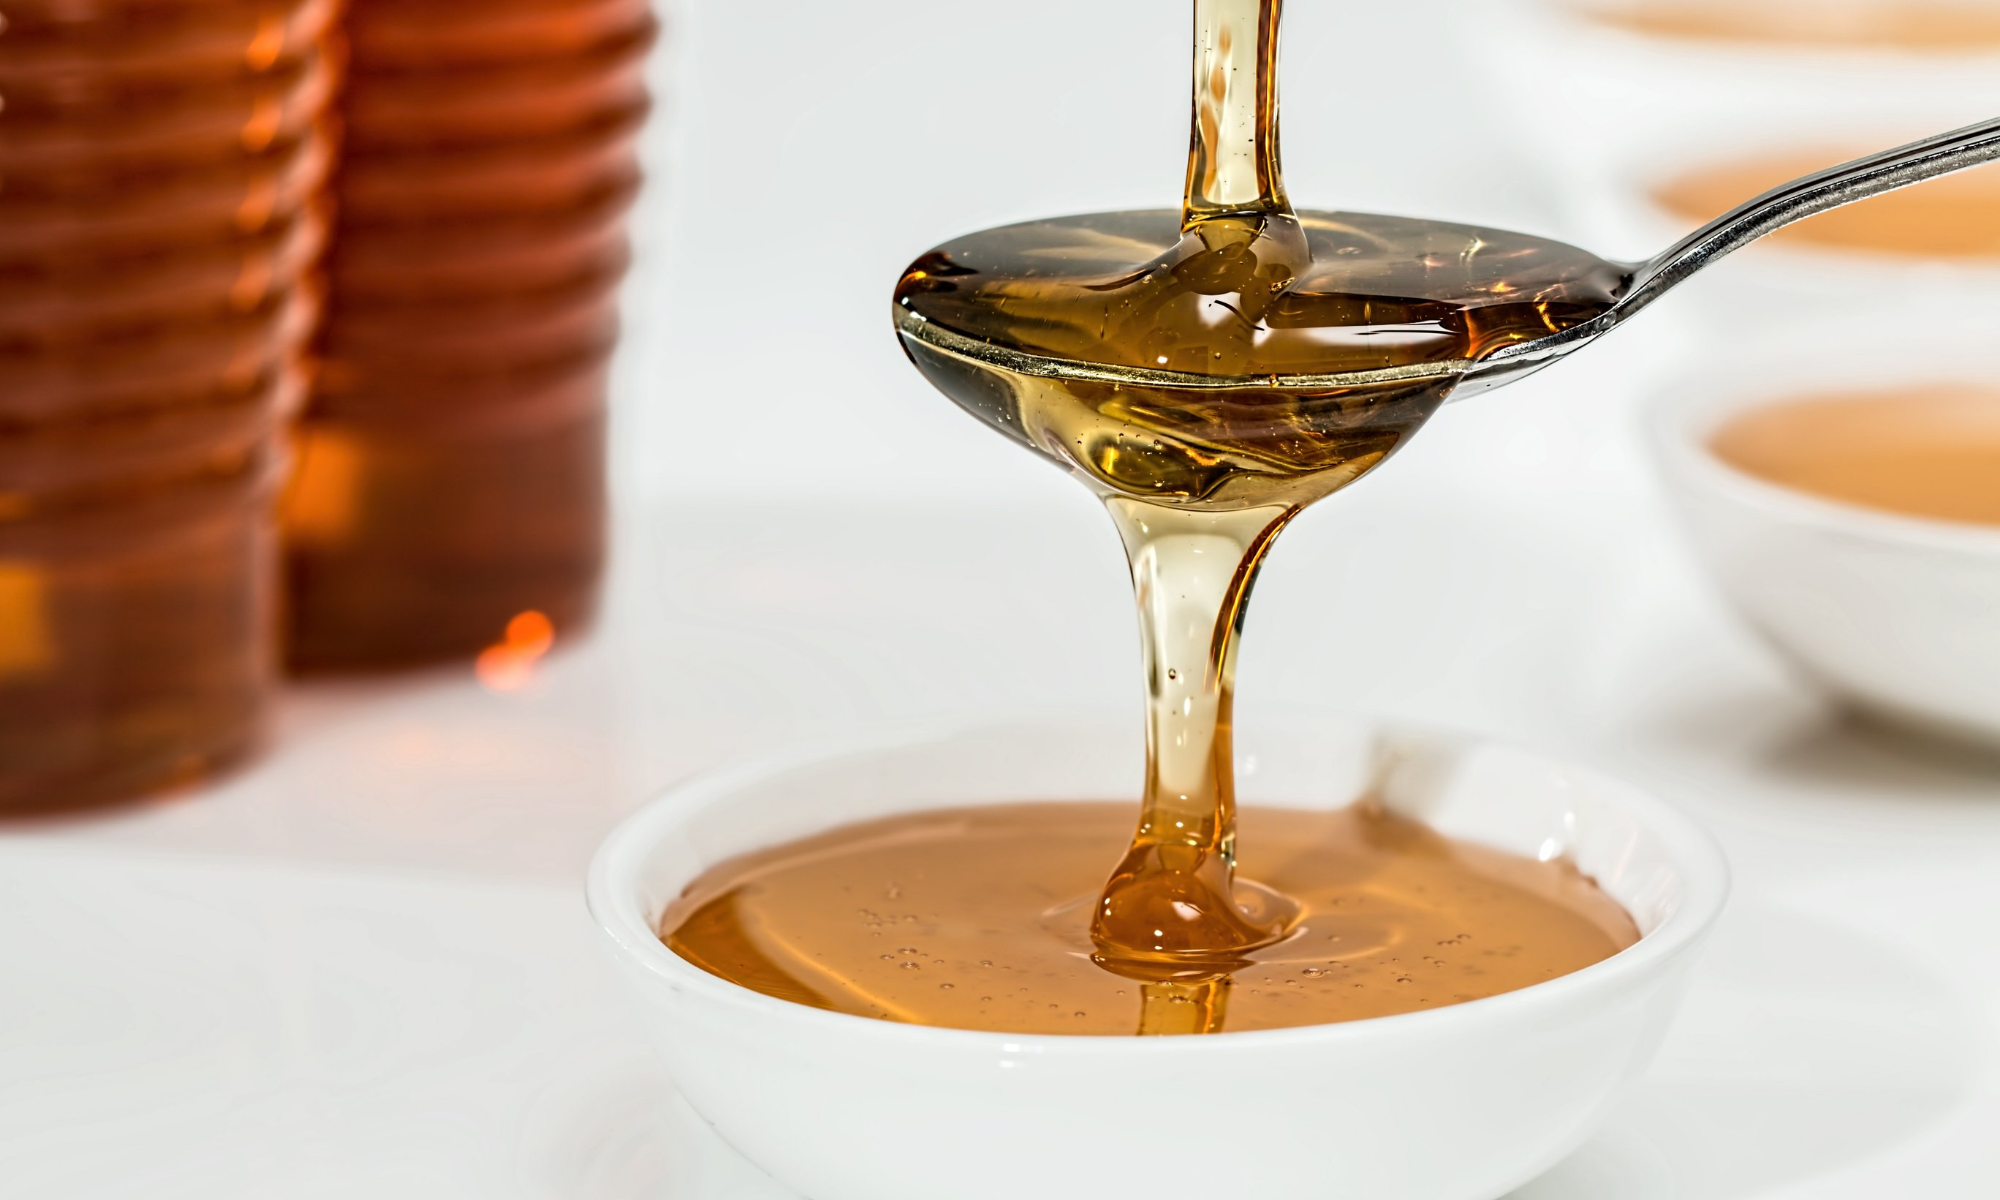 Honey cascading down into a spoon and overflowing into a small bowl